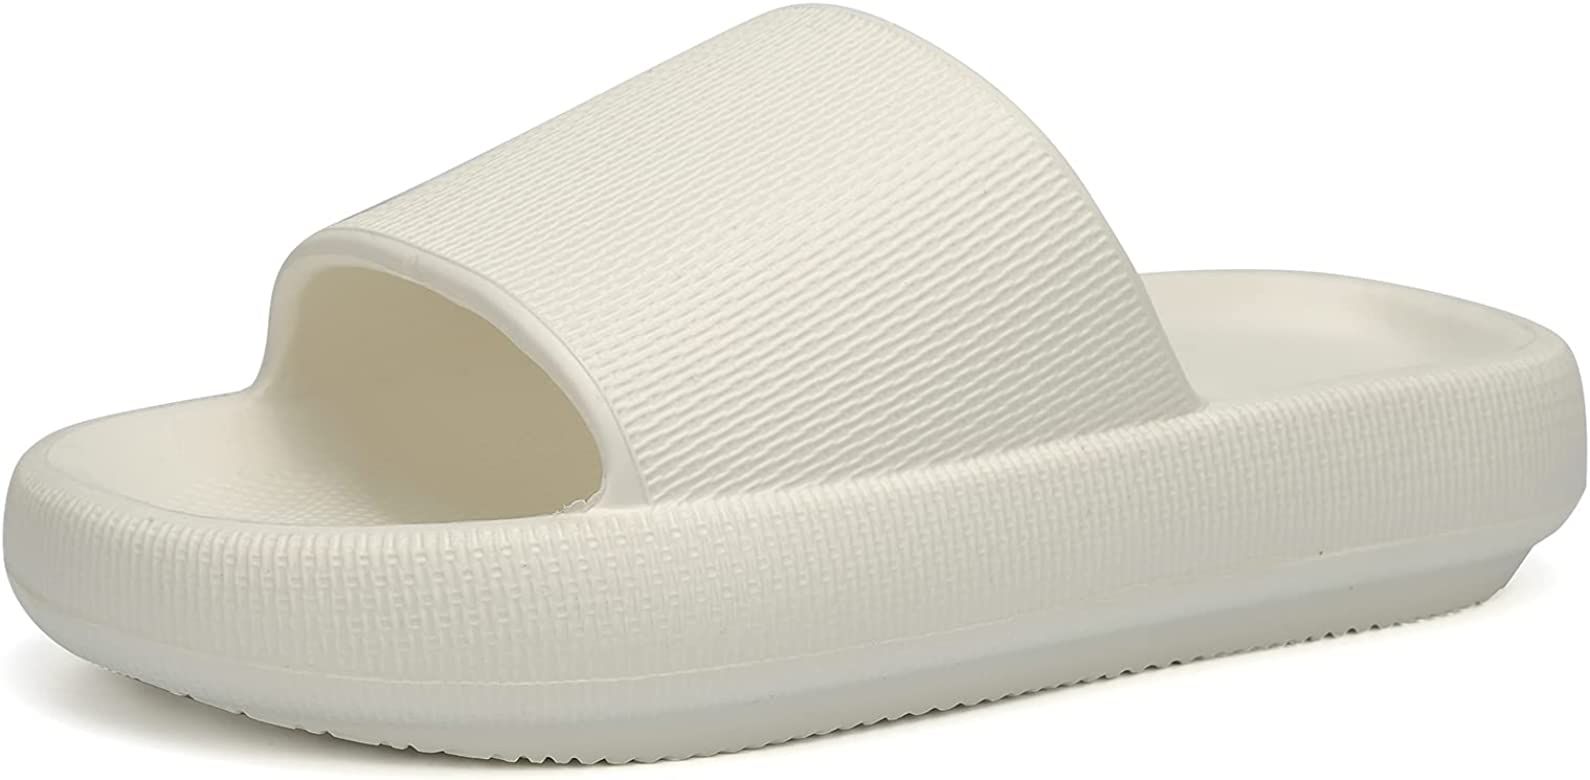 EQUICK Cloud Slides Pillow Slippers for Women and Men | Shower Slippers Bathroom Sandals | Ultra ... | Amazon (US)